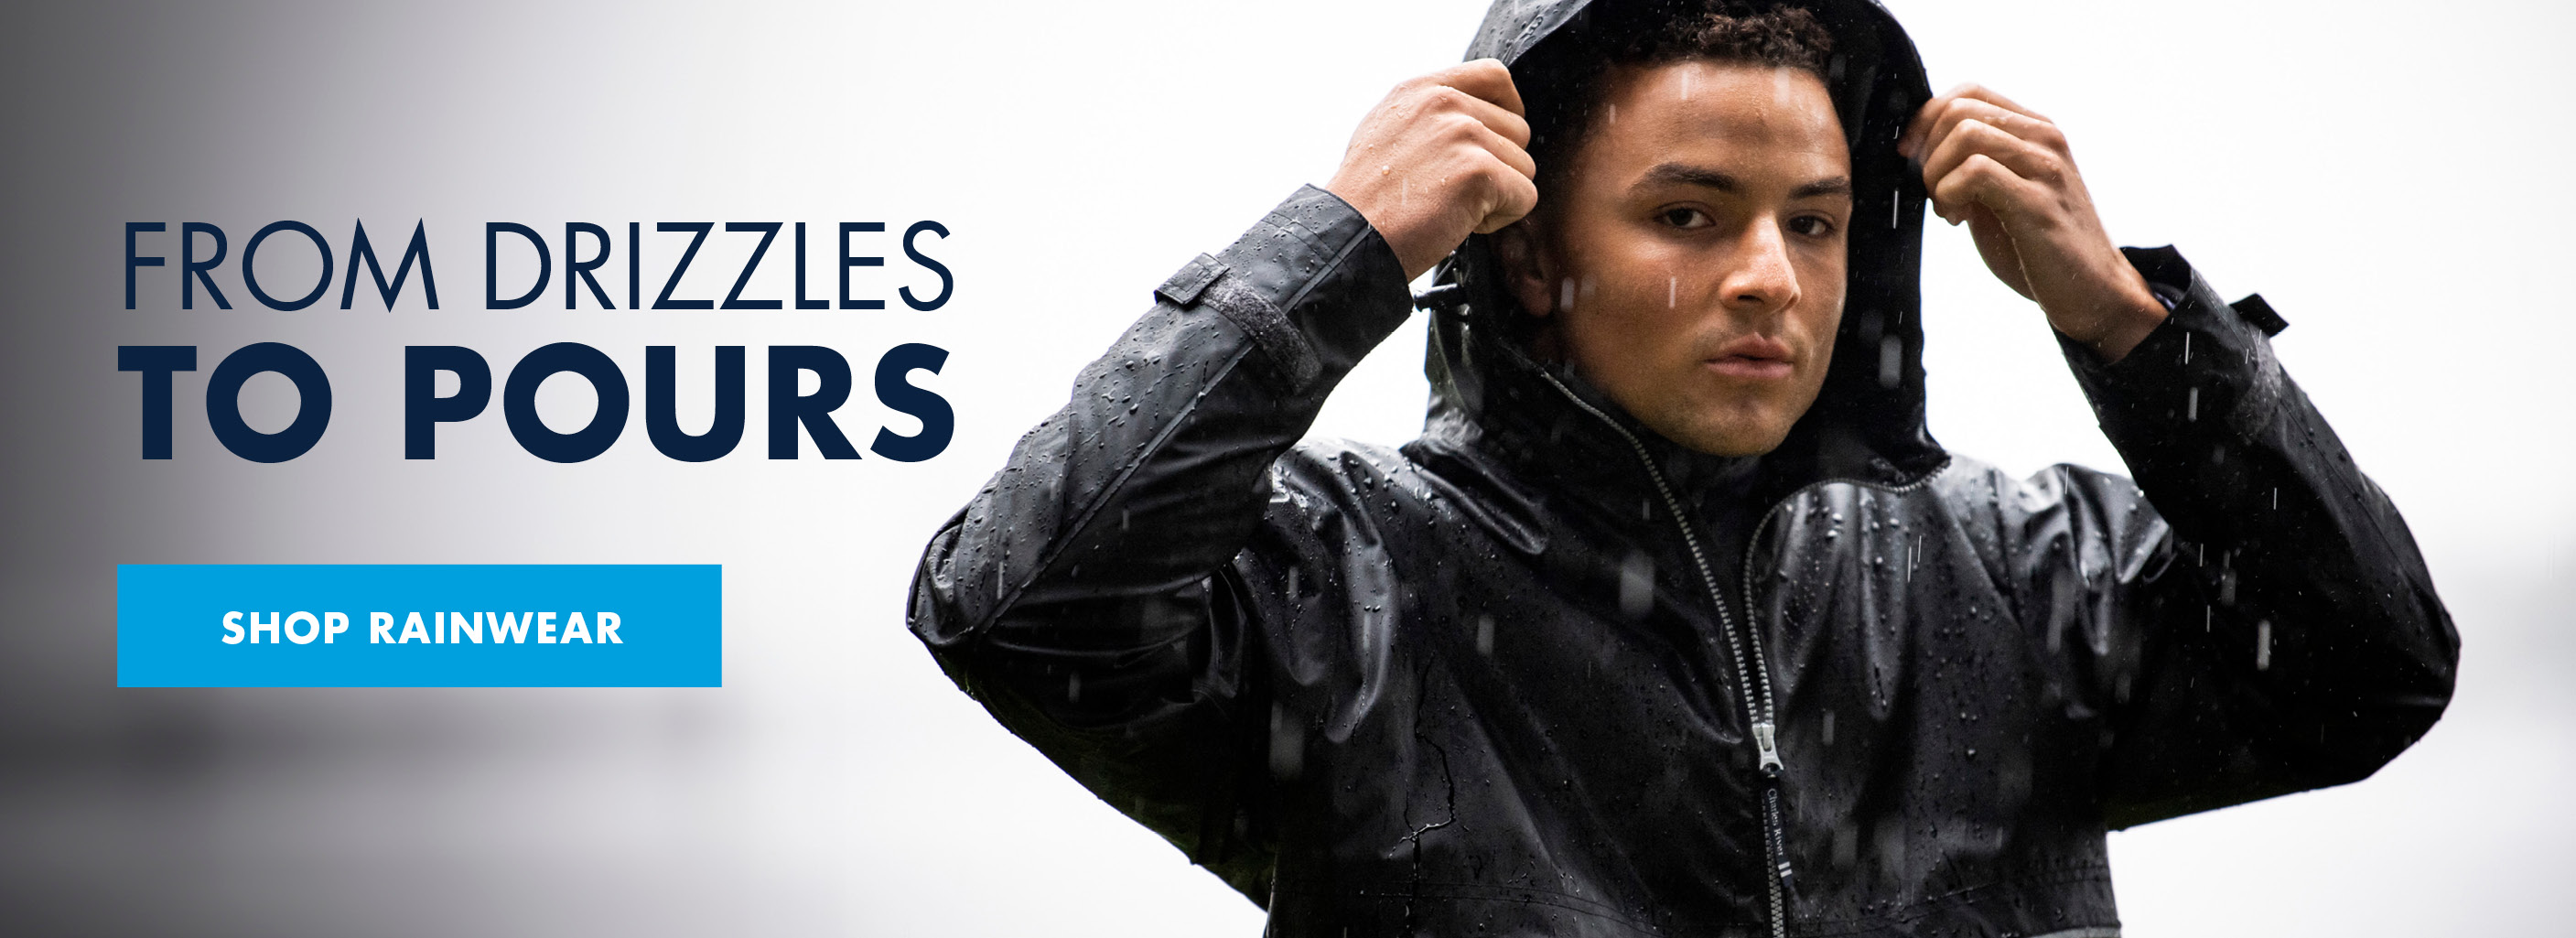 From Drizzles To Pours - Shop Rainwear